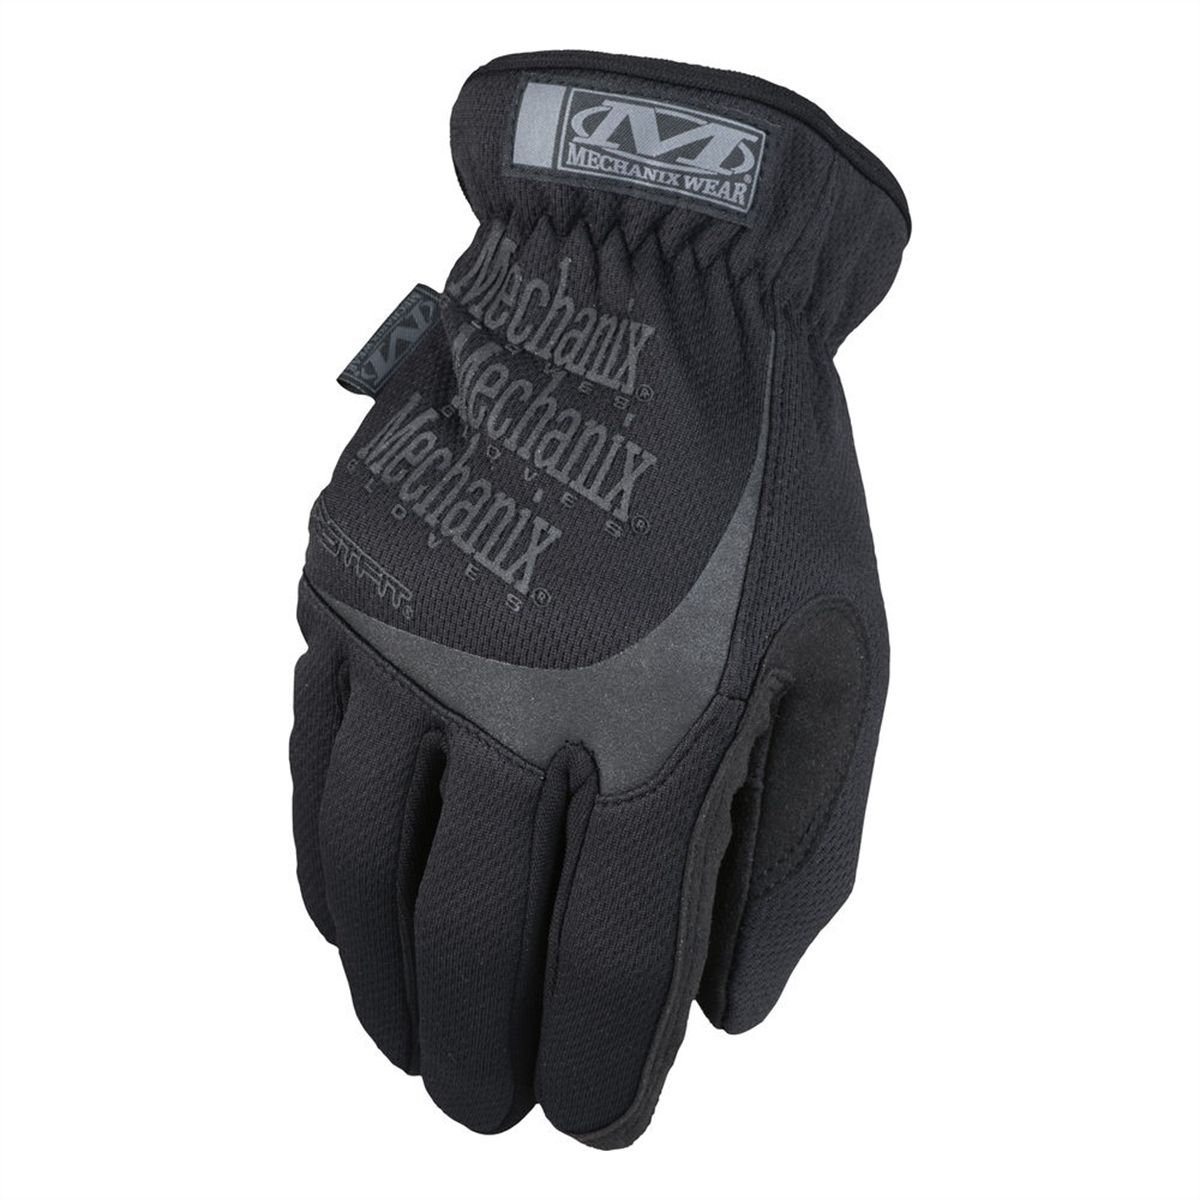 TAA Compliant FastFit Glove Covert MD/9